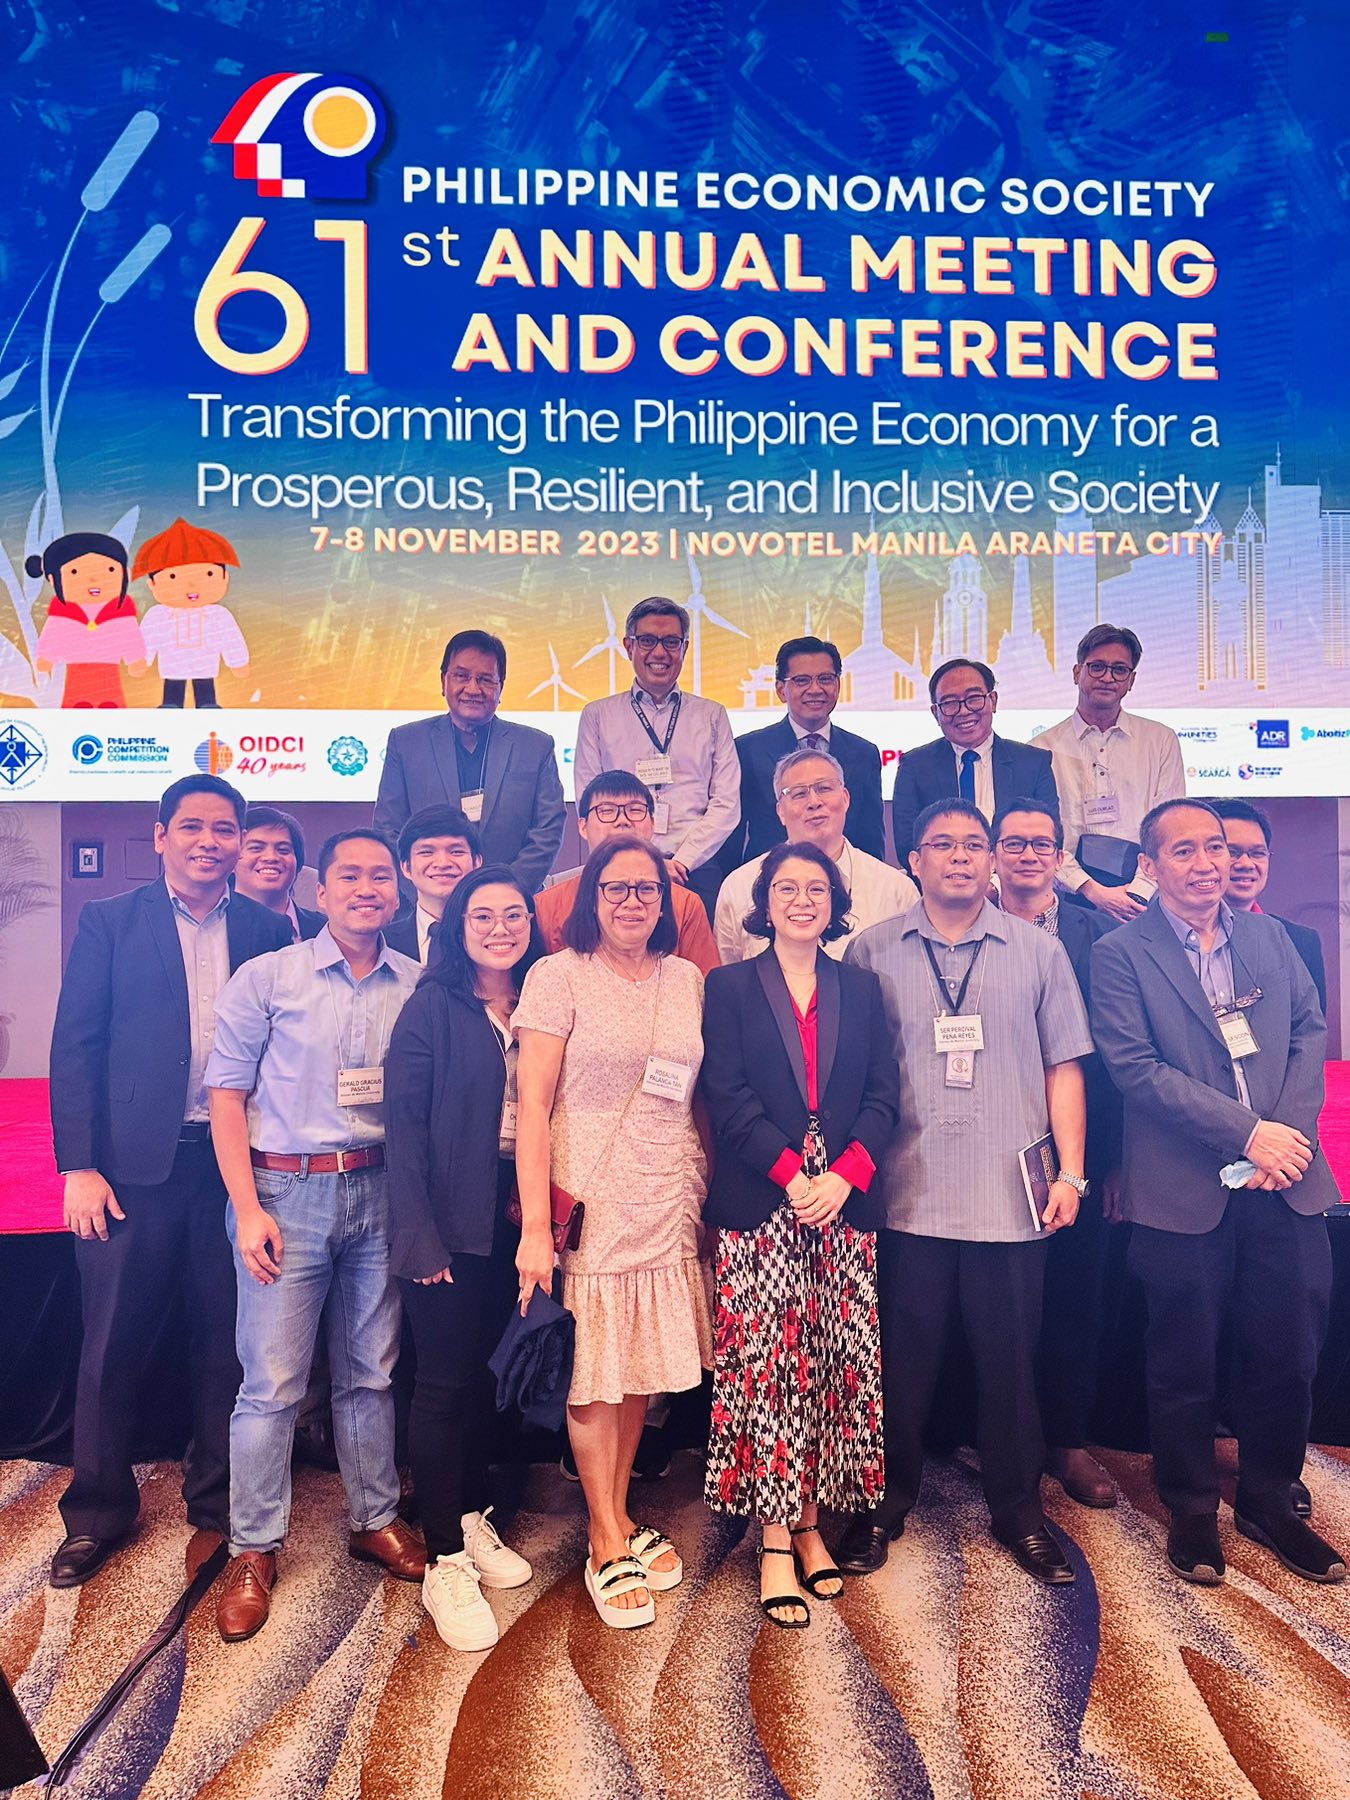 The Ateneo Contingent at the PES 61st Annual Meeting and Conference